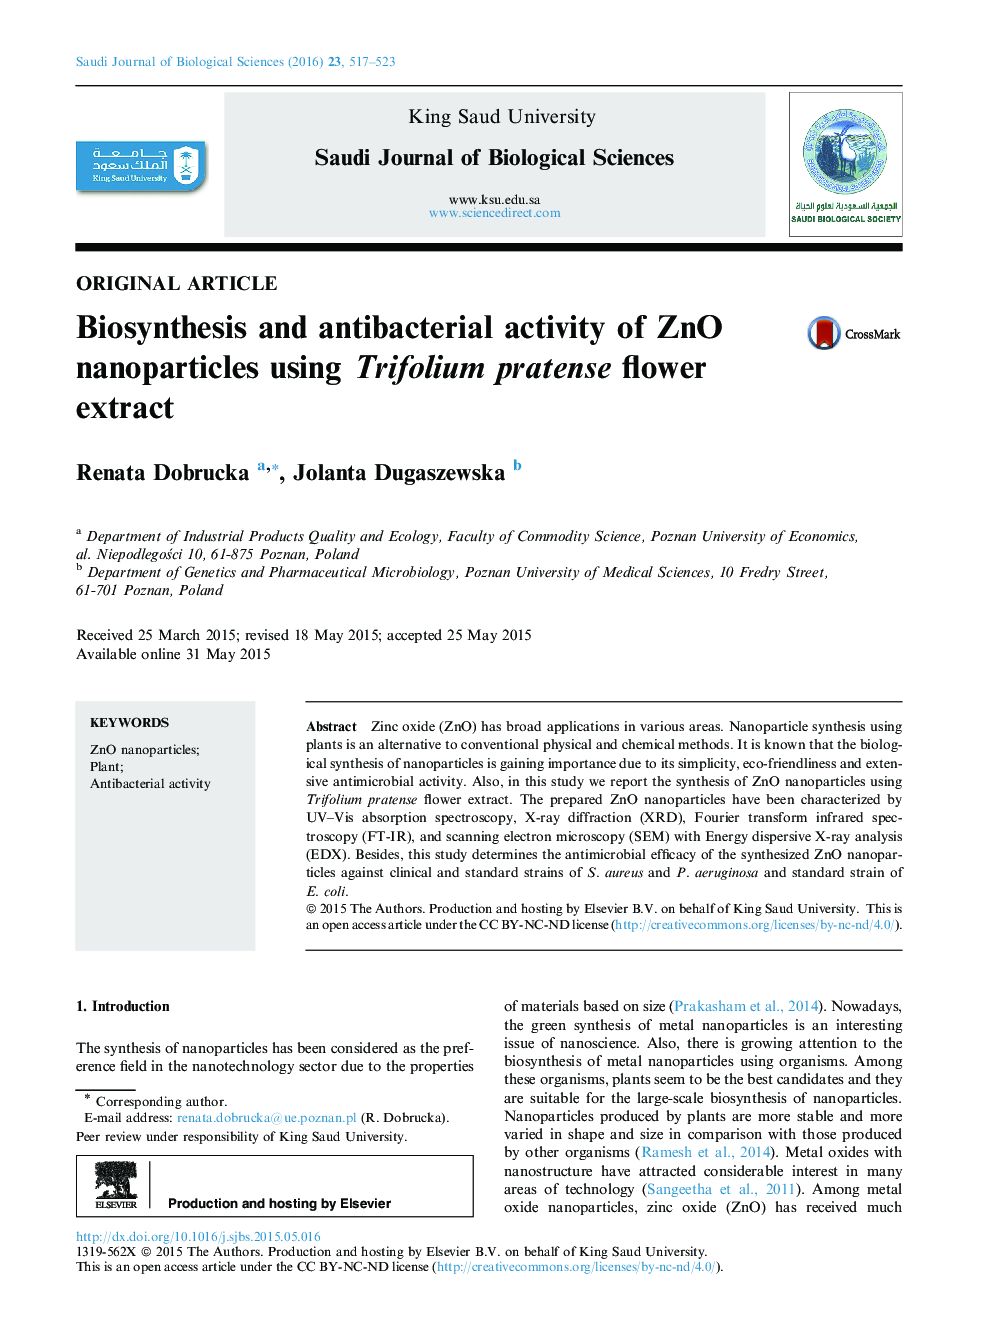 Biosynthesis and antibacterial activity of ZnO nanoparticles using Trifolium pratense flower extract